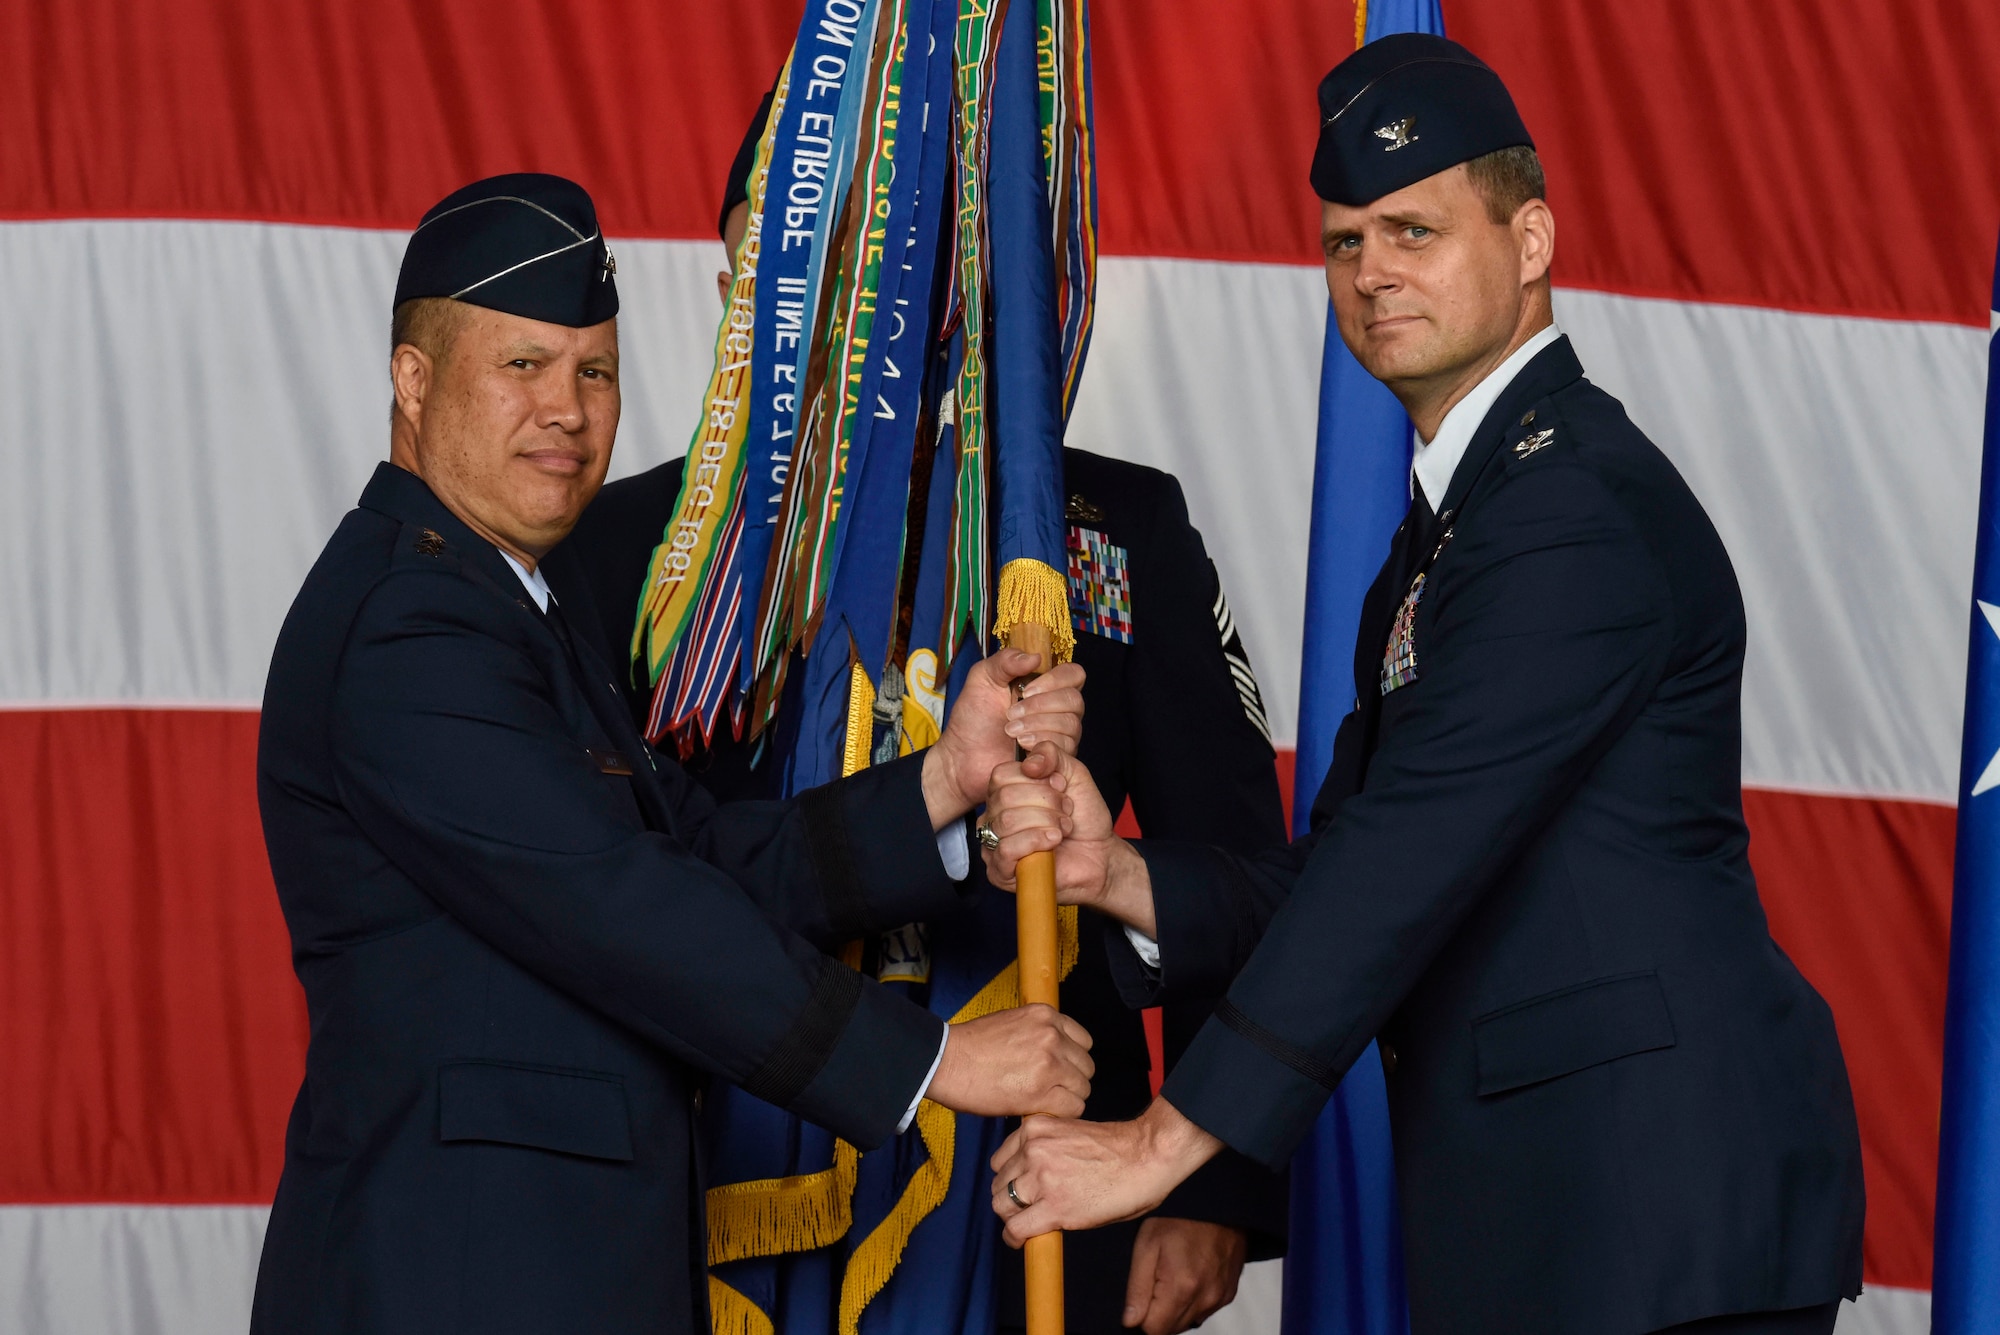 Lt. Gen. GI Tuck (left), 18th Air Force commander, presents the 436th Airlift Wing guidon to Col. Joel Safranek, incoming 436th AW commander, during a change of command ceremony May 30, 2018, at Dover Air Force Base, Del. During the ceremony, Safranek assumed command of the 436th AW becoming the wing’s 34th commander. (U.S. Air Force photo by Airman 1st Class Zoe M. Wockenfuss)